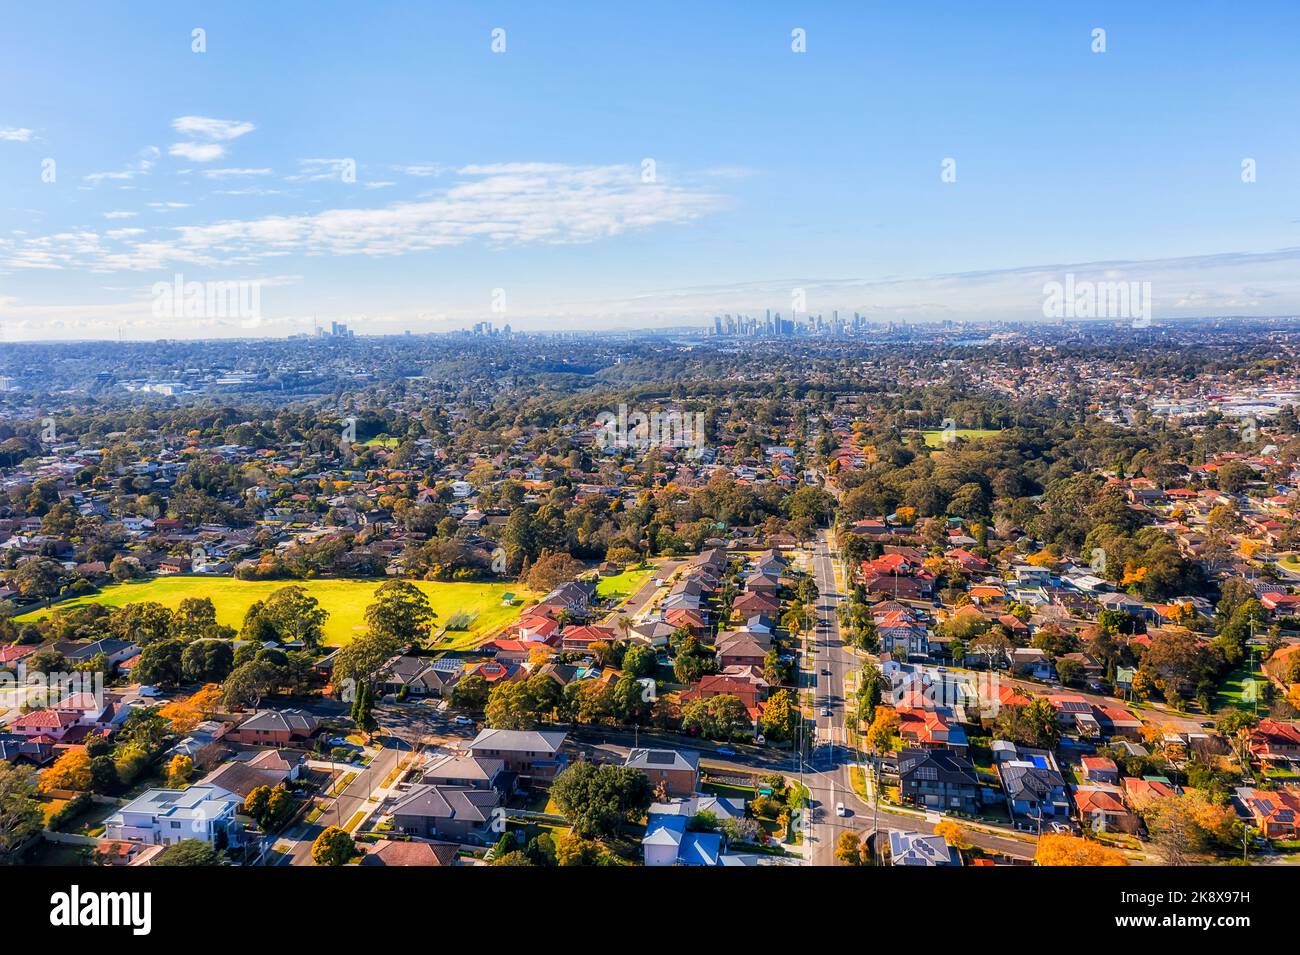 City of Ryde local residential suburbs on Sydney West in aerial cityscape view towards distant city CBD skyline. Stock Photo